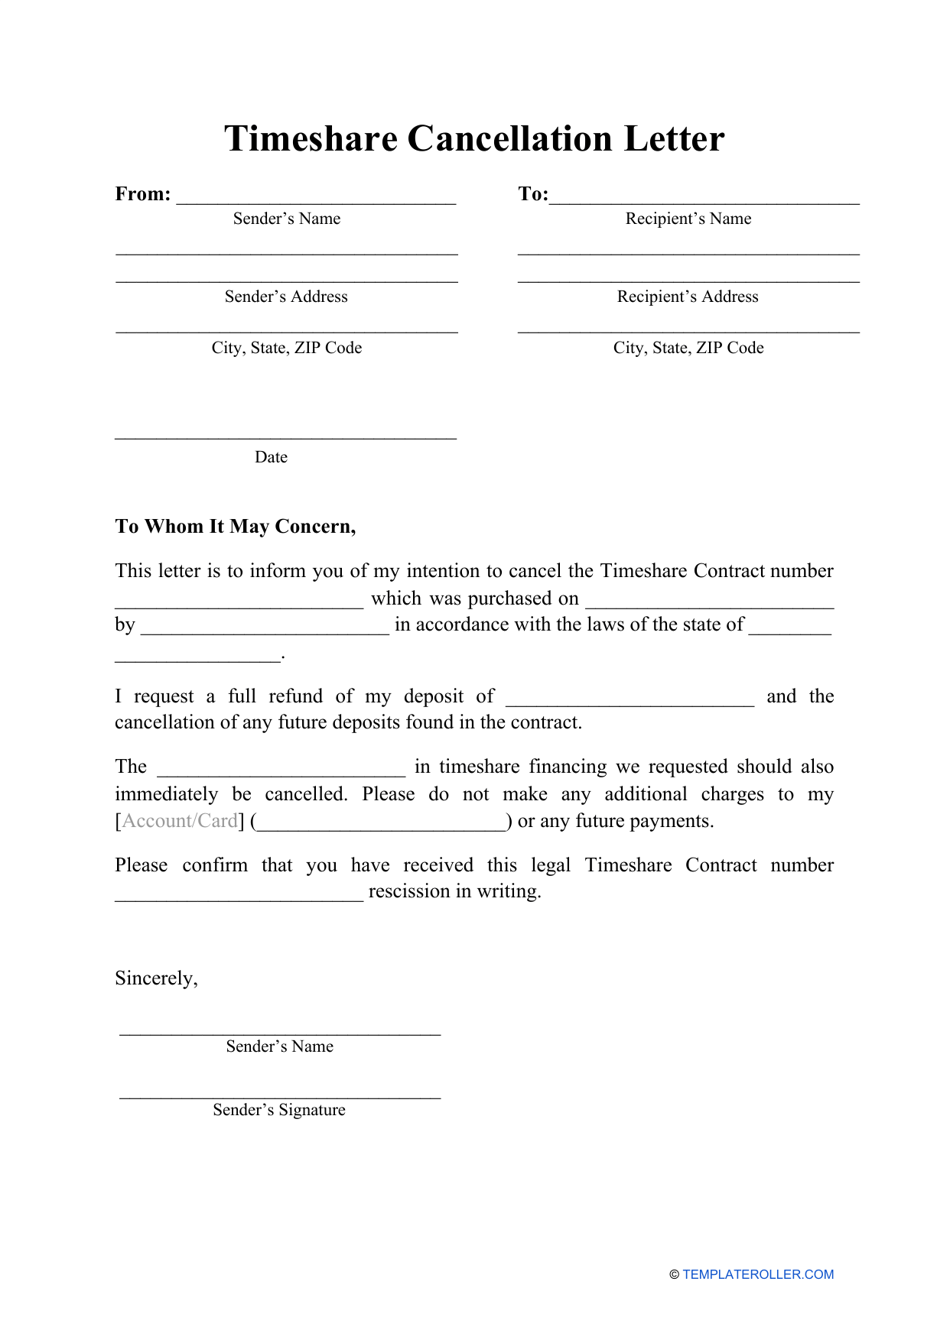 Timeshare Cancellation Letter Template Download Printable PDF